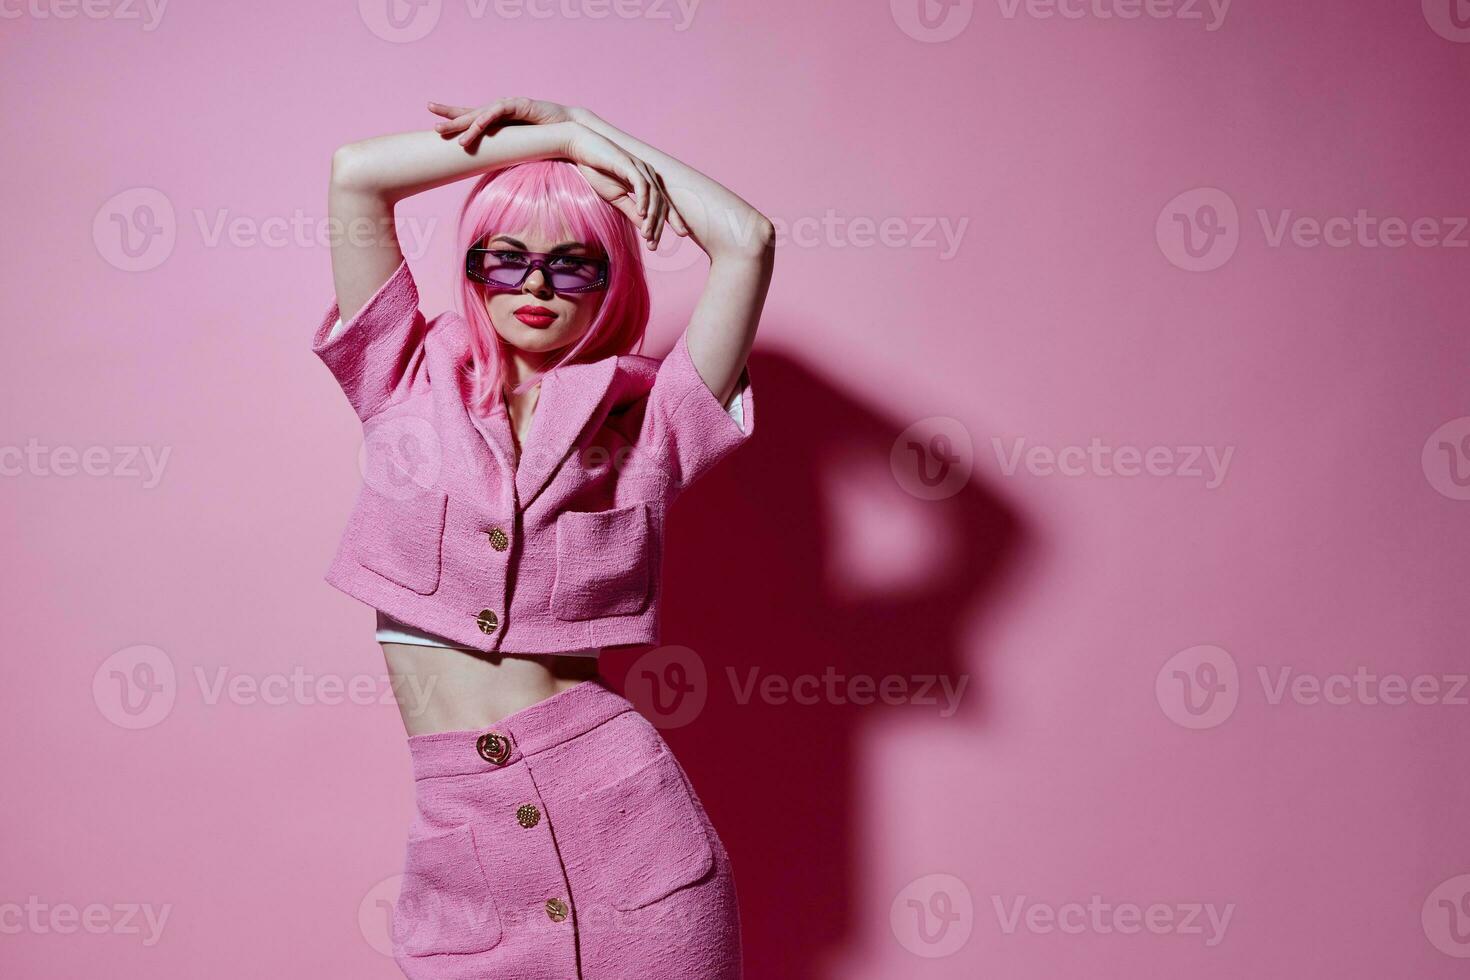 Young positive woman pink suit sunglasses posing pink background unaltered photo